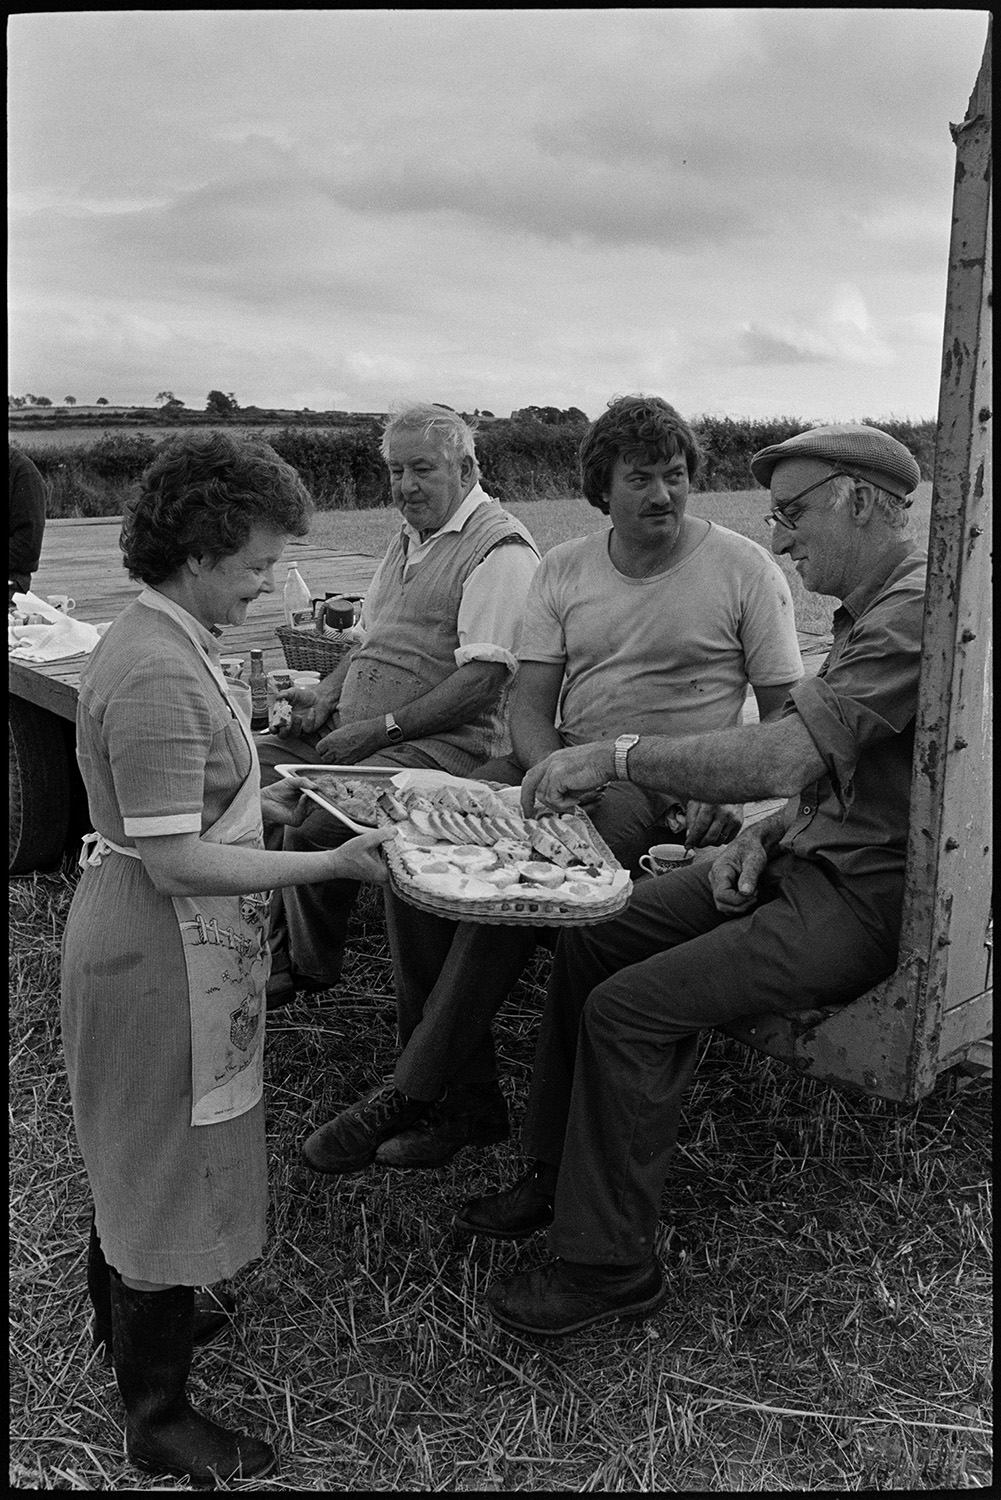 Woman farmers wife serving refreshments to harvesters in the field. 
[Pam Down serving slices of cake on trays to men reedcombing in a field at Spittle, Chulmleigh. The men are sat on a trailer.]